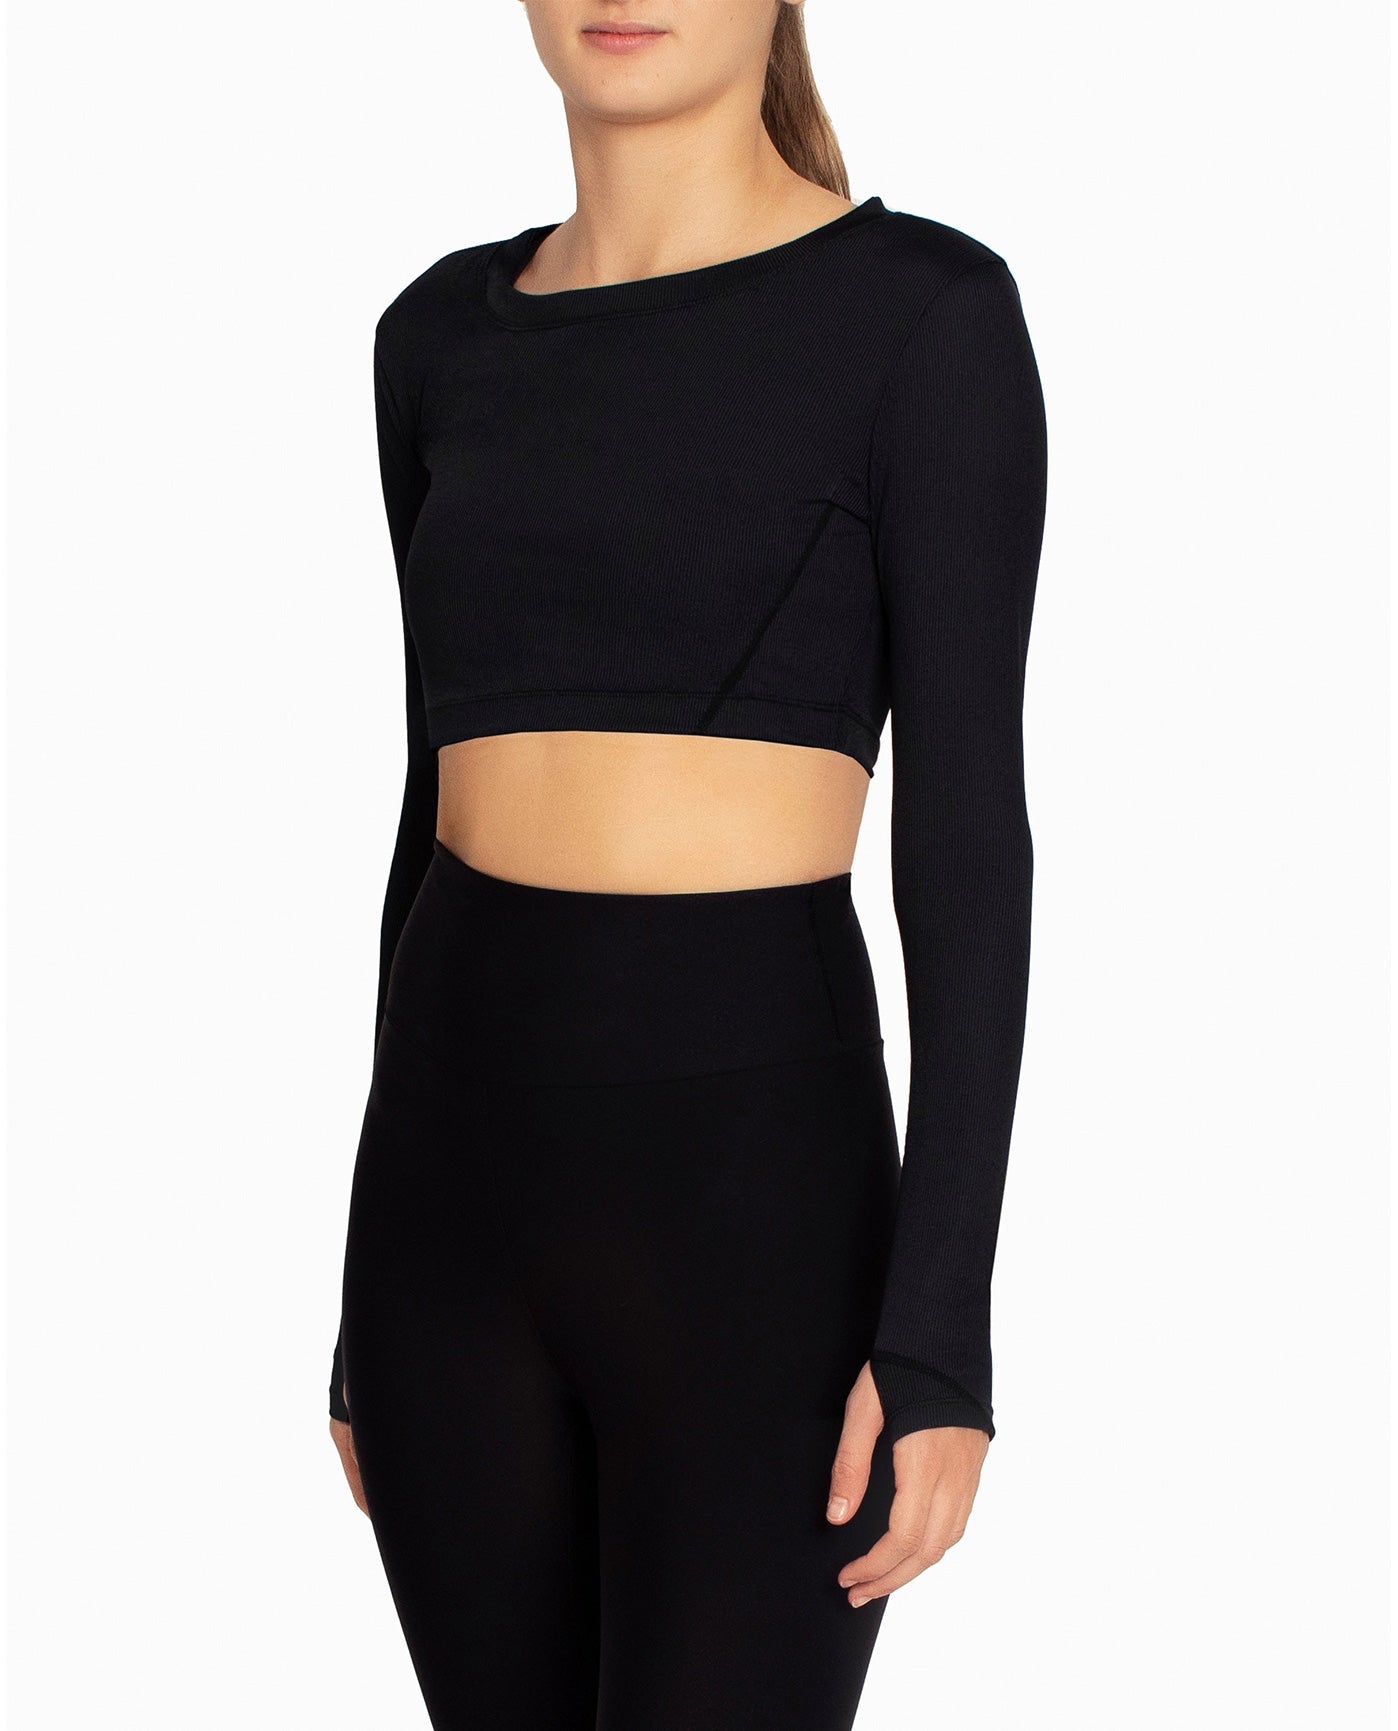 SIDE OF CROPPED ACTIVE LONG SLEEVE TOP | JET BLACK